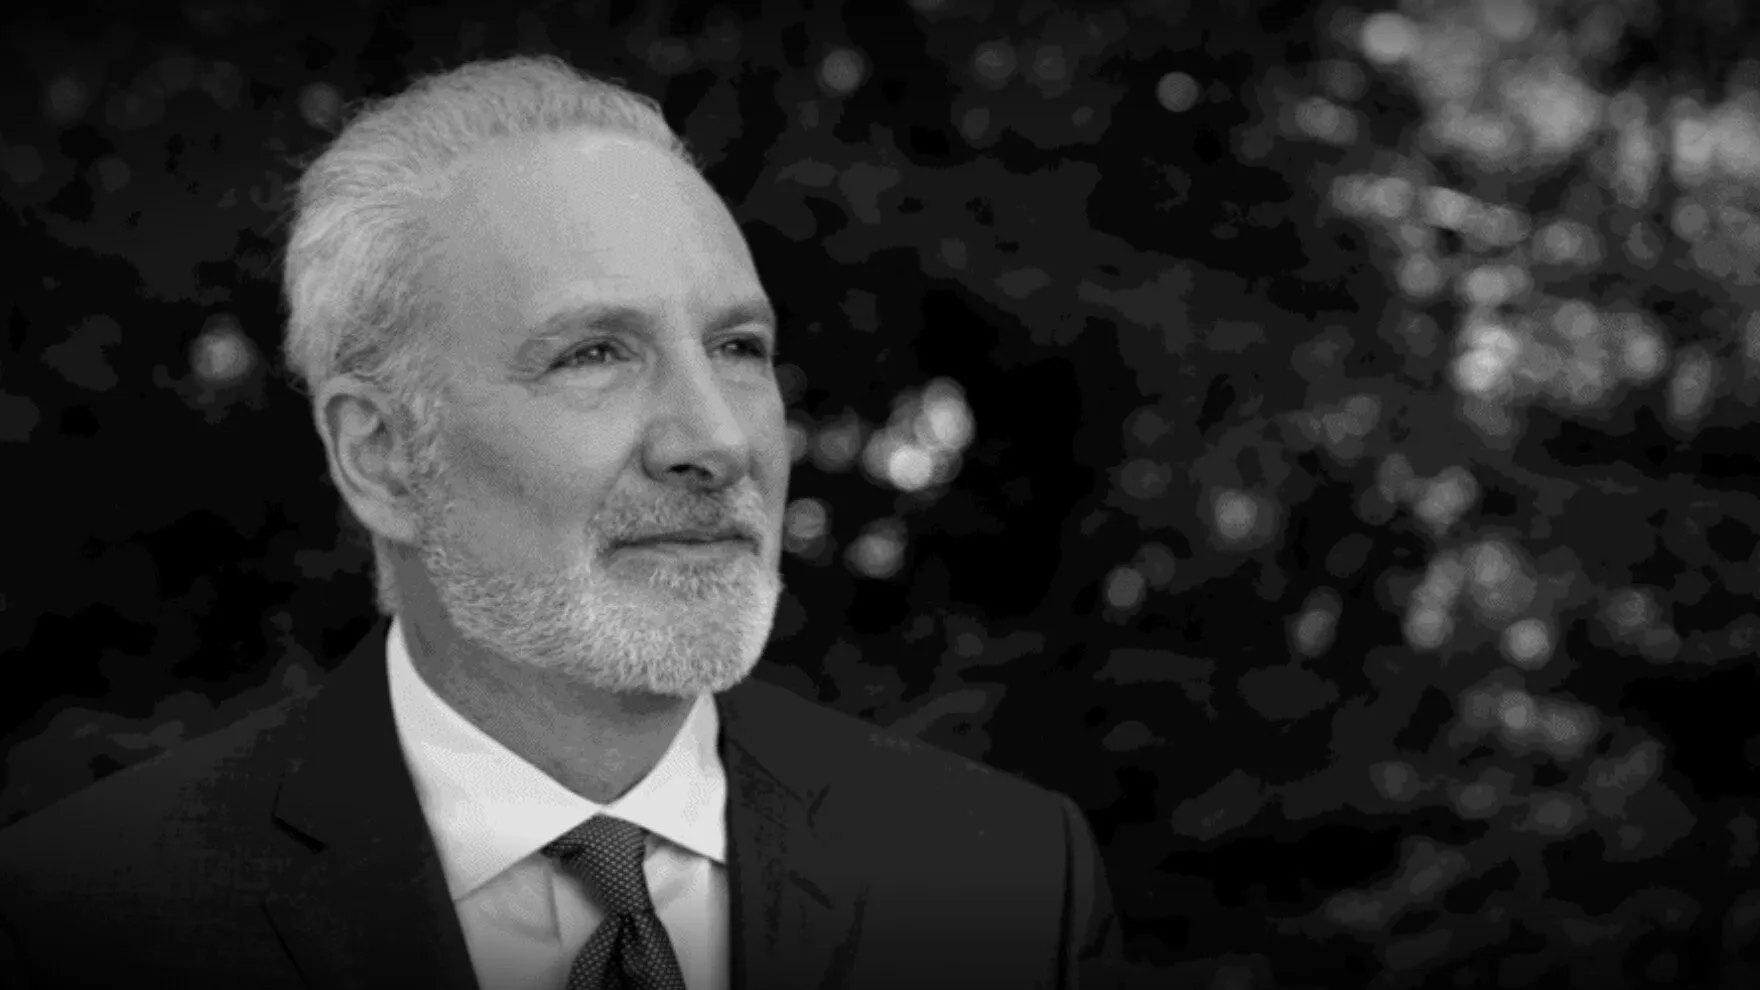 Image: The Peter Schiff Show